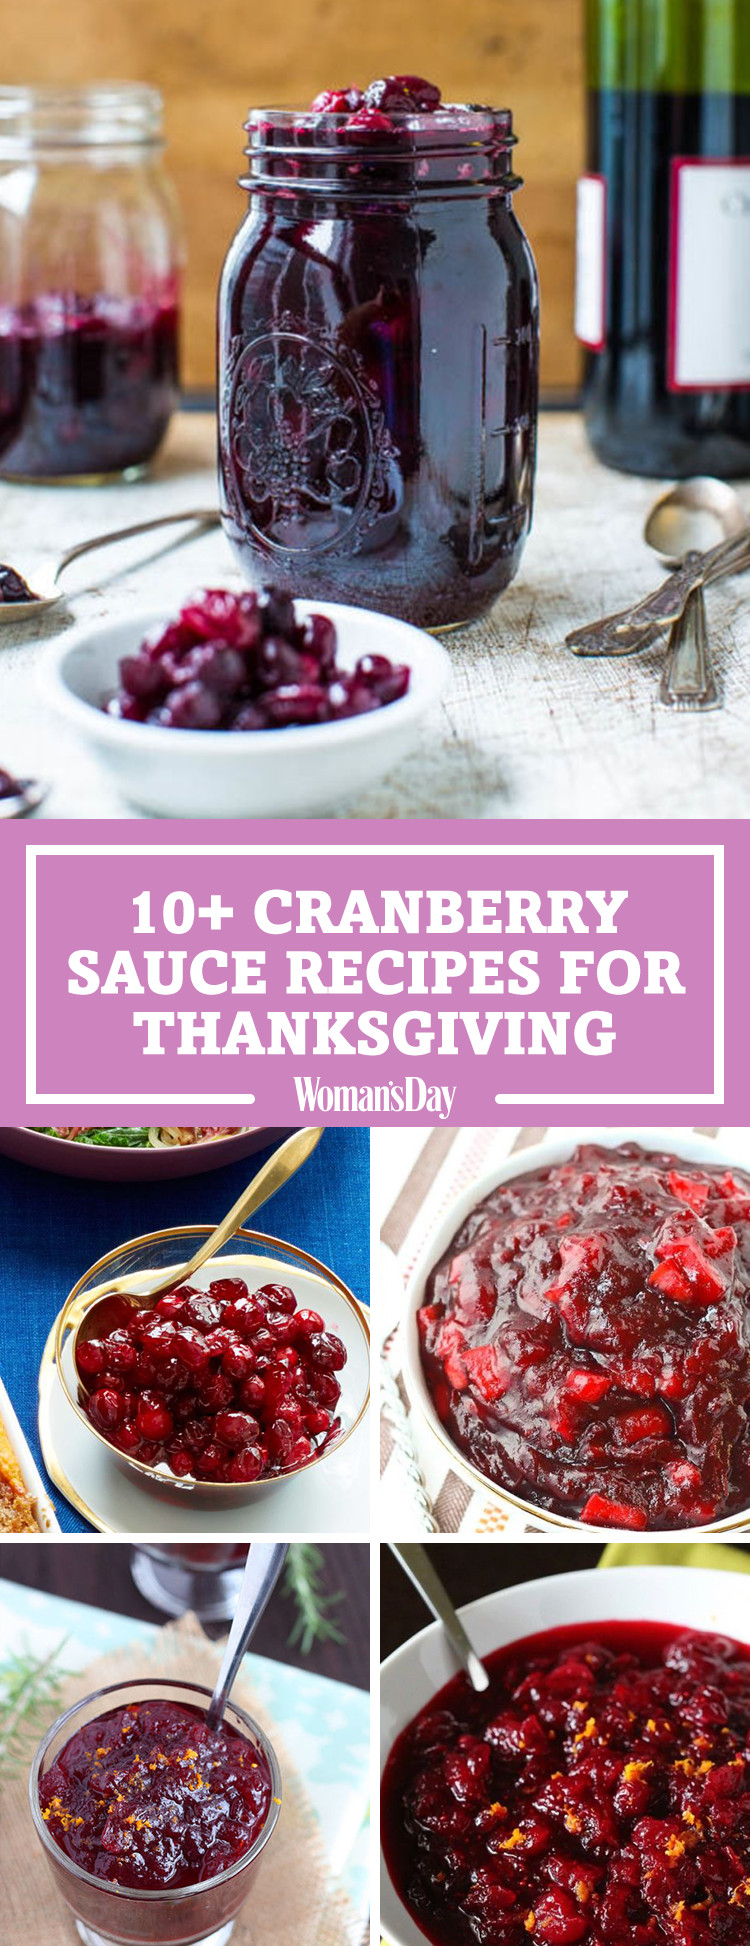 Cranberry Sauce Recipes Thanksgiving
 13 Easy Cranberry Sauce Recipes for Thanksgiving How to